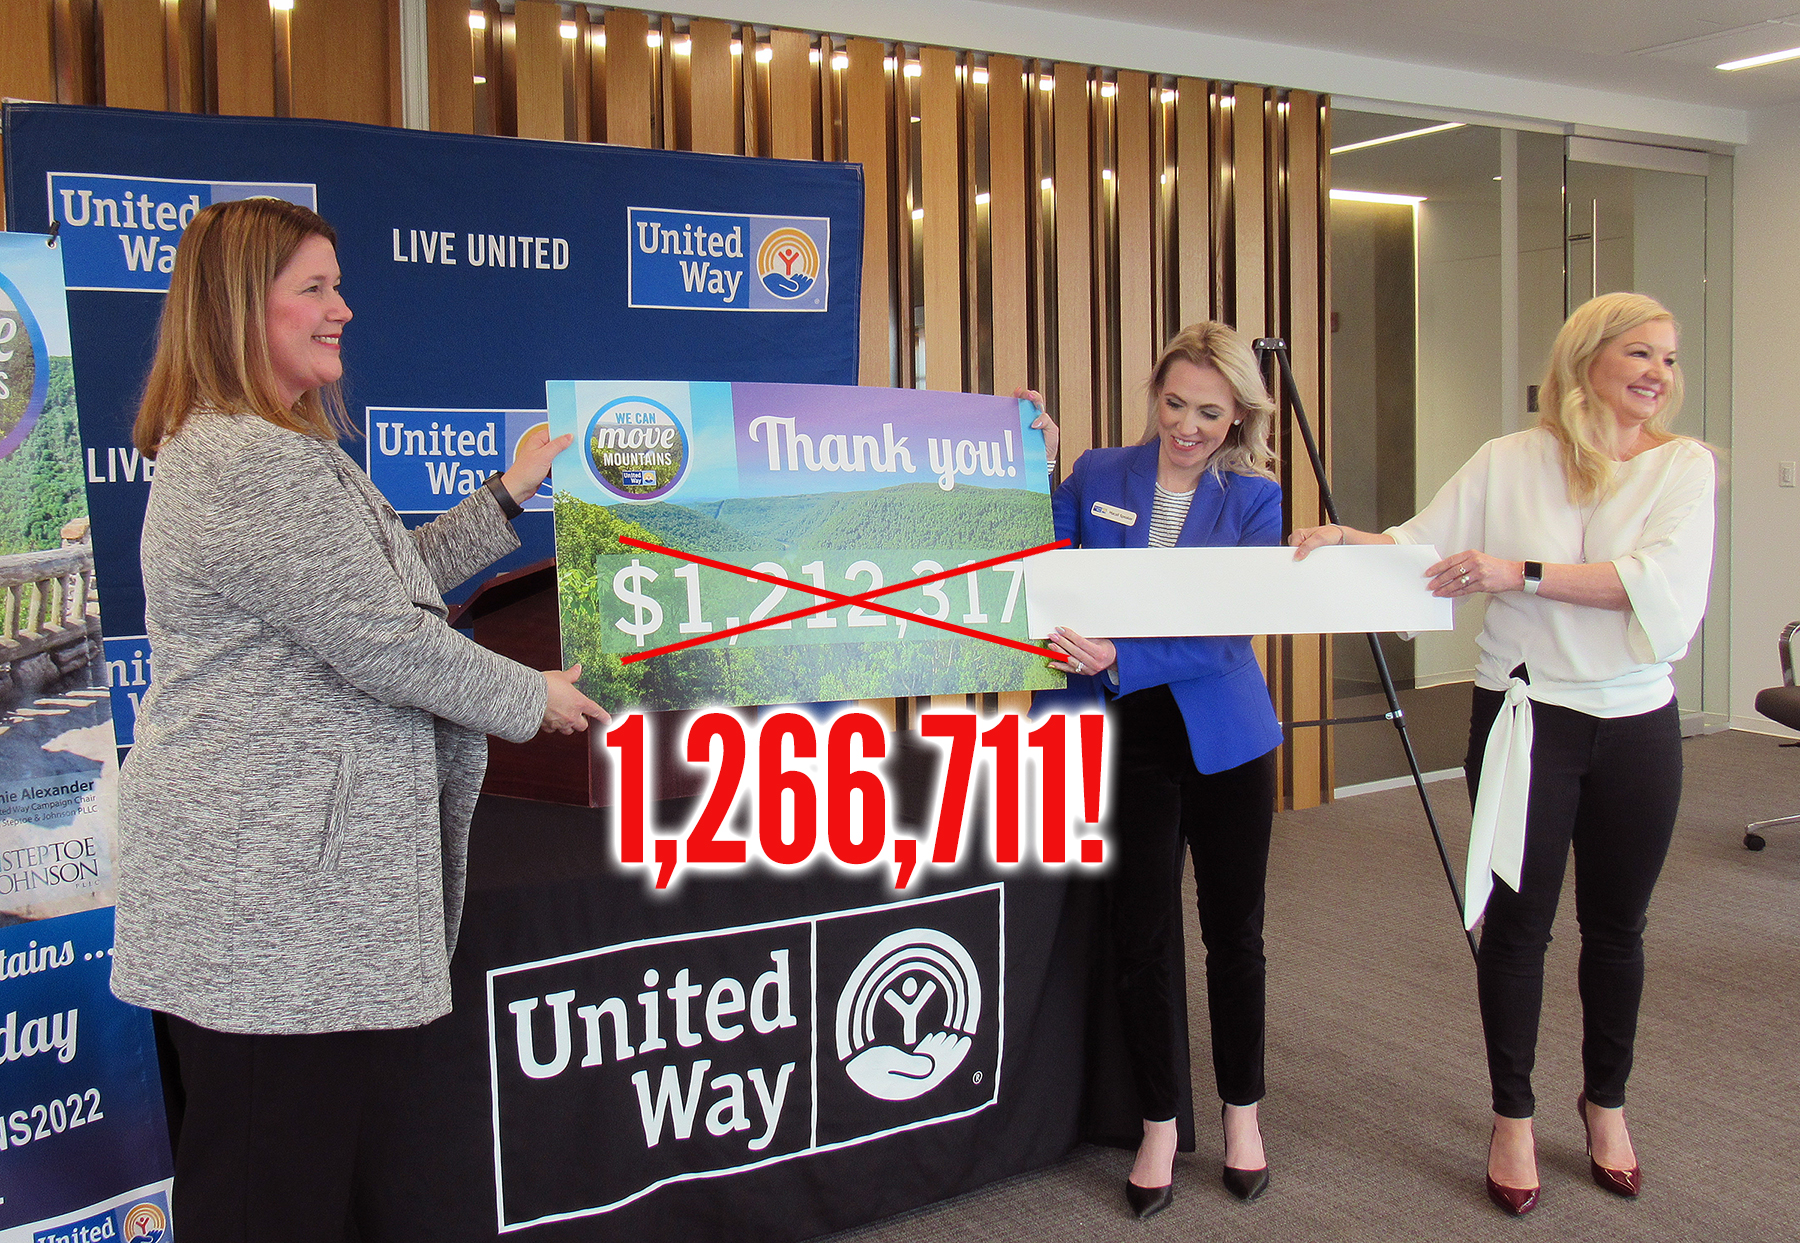 Brandi Helms (from left), Macall Speaker and Tammie Alexander reveal the total amount raised for the United Way of Monongalia and Preston Counties’ 2022 Campaign on Friday morning, Feb. 18, at Steptoe and Johnson in Morgantown. After the number reveal and at the end of the press conference, one of United Way’s large corporate campaigns released its results, so another $54,394 was added to this, making the overall total $1,266,711.